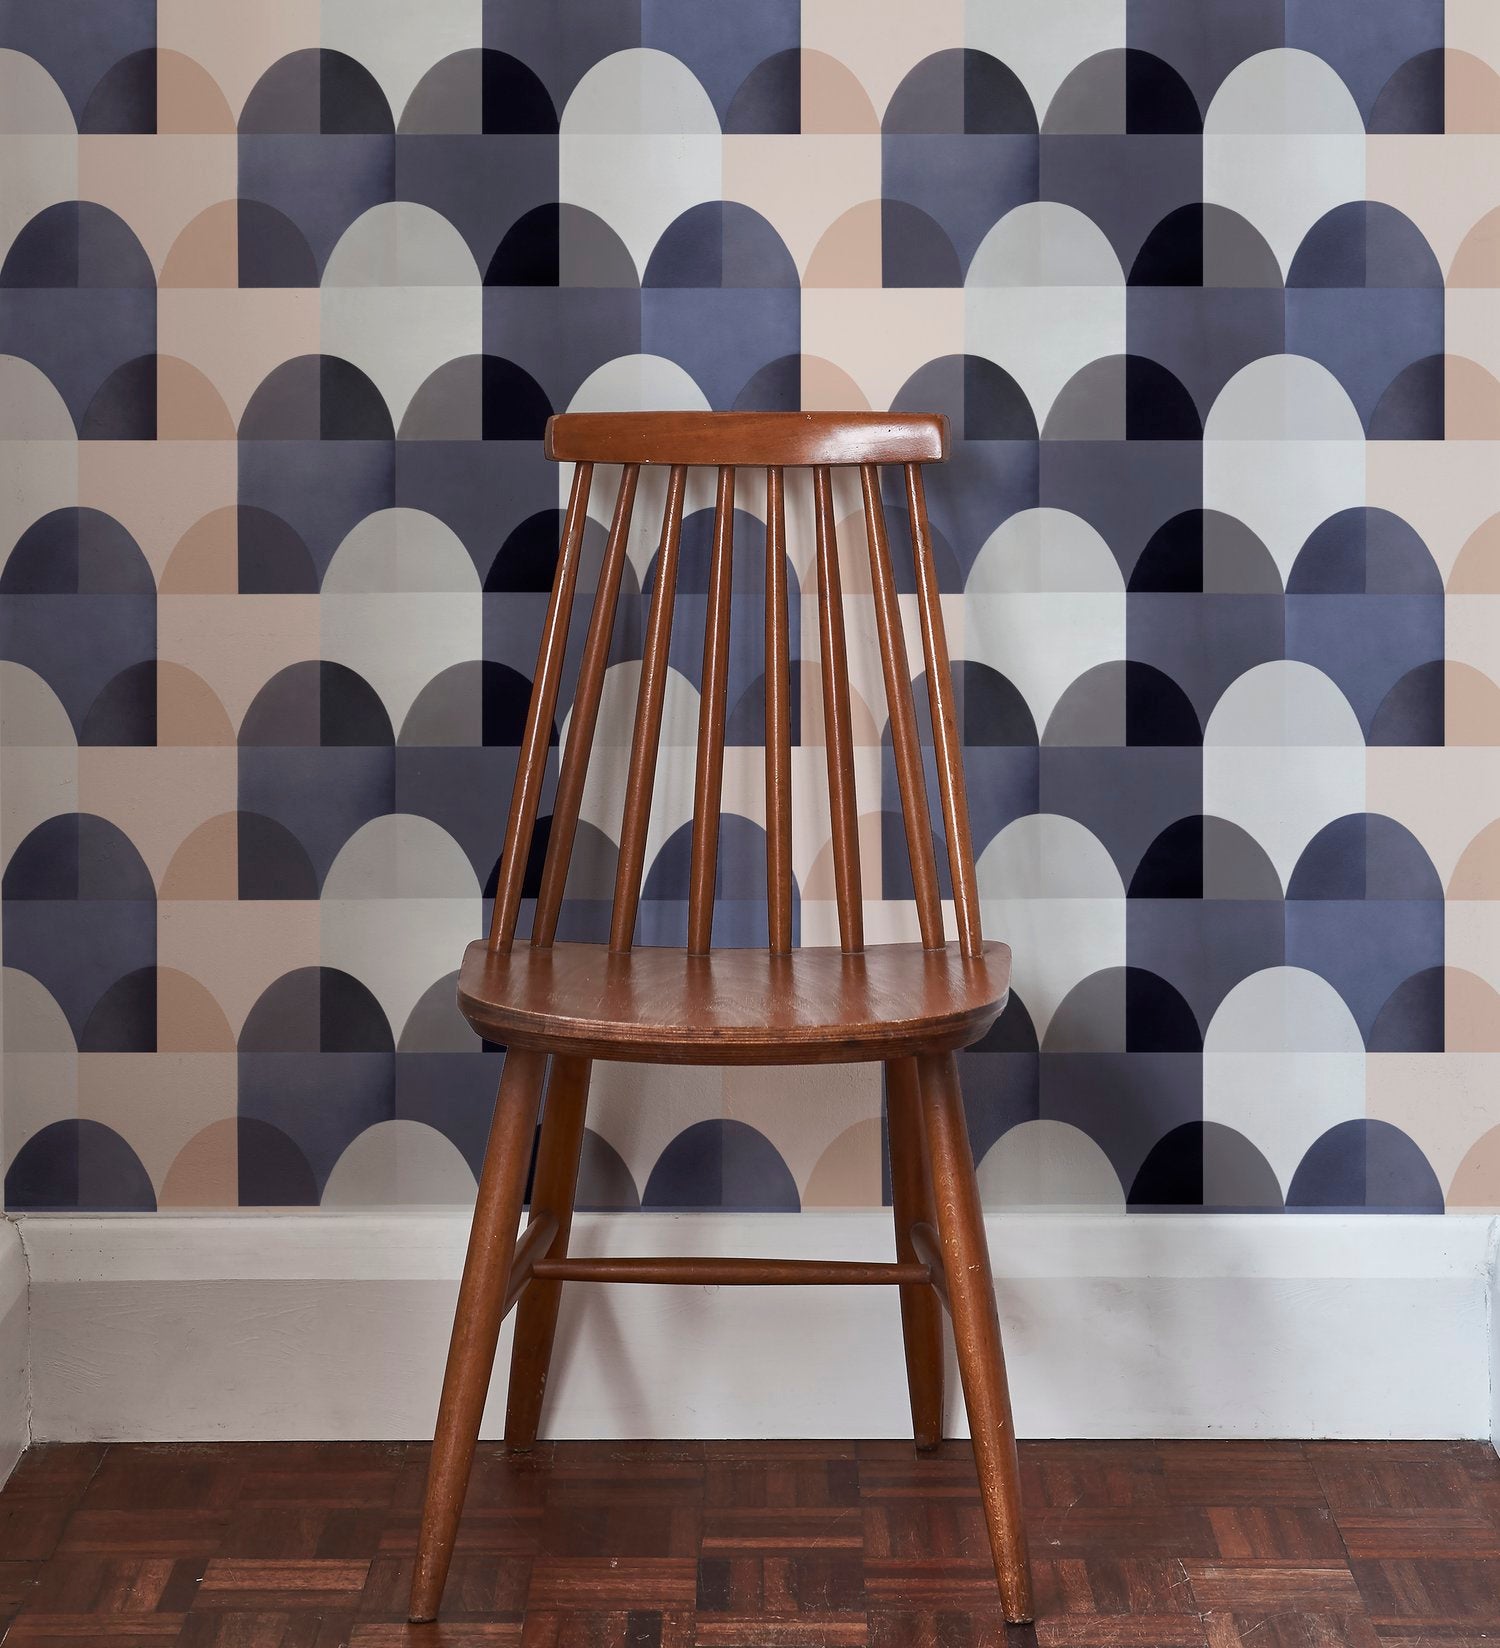 A wooden chair stands in front of a wall papered in a curvy geometric print in shades of white, tan, purple and gray.